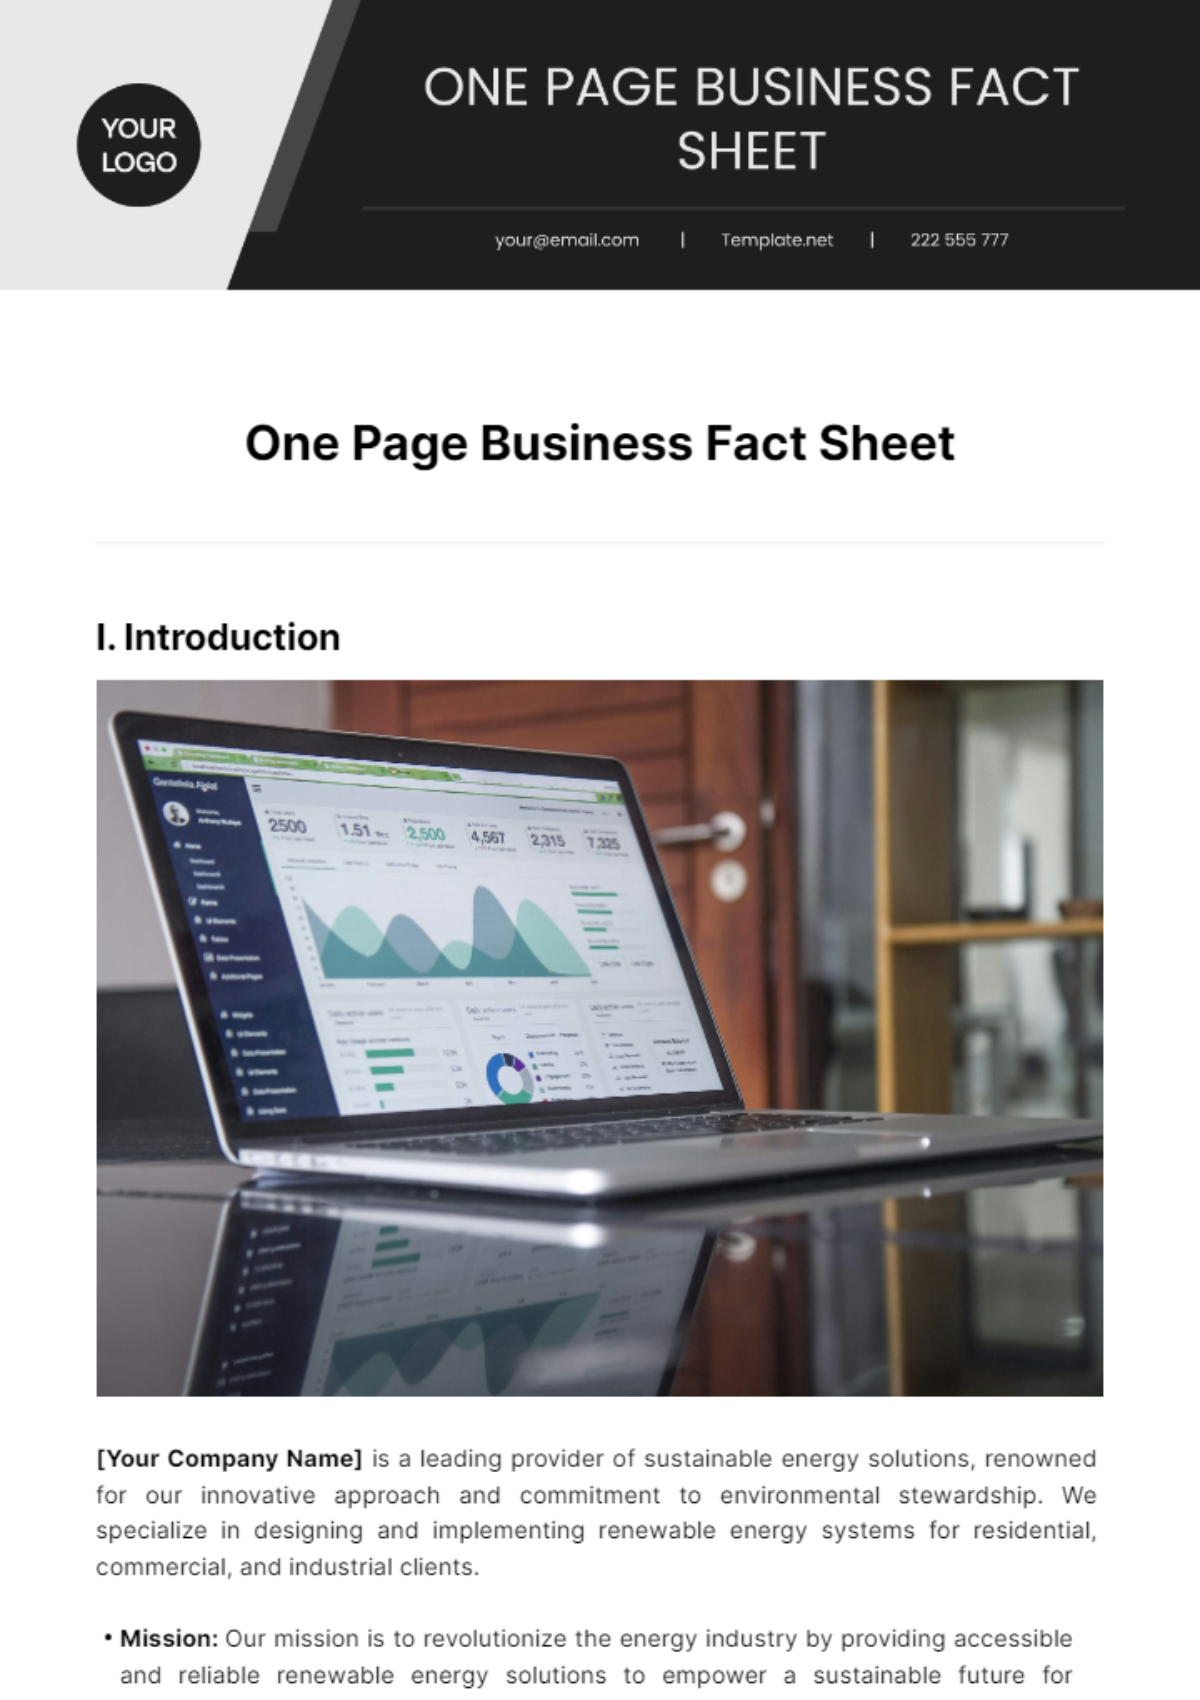 One Page Business Fact Sheet Template